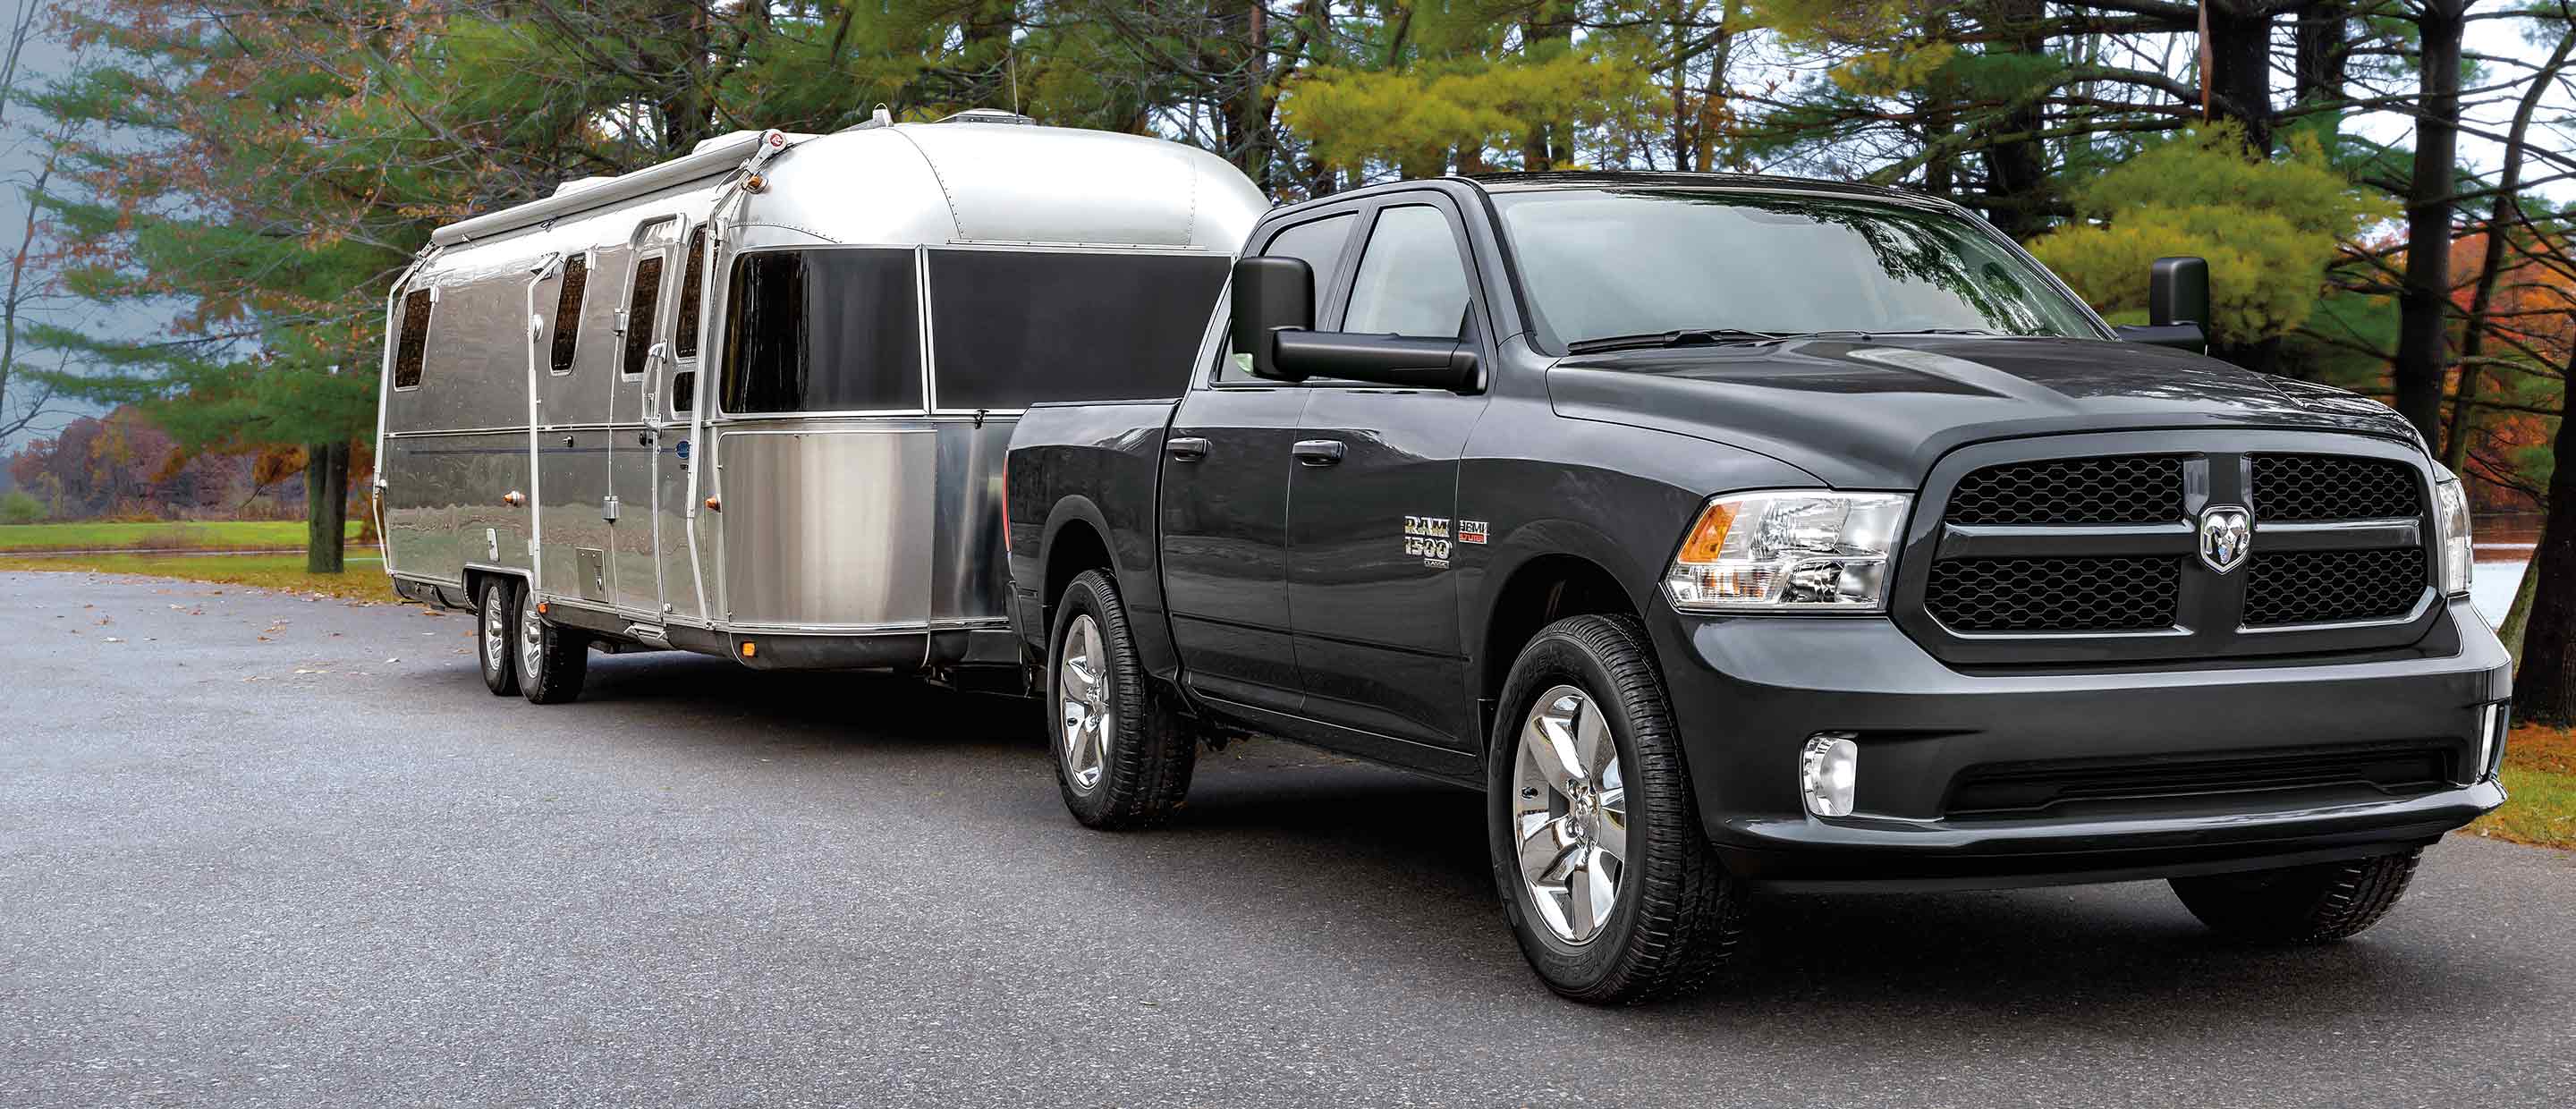 The 2022 Ram 1500 Classic towing a camper trailer.